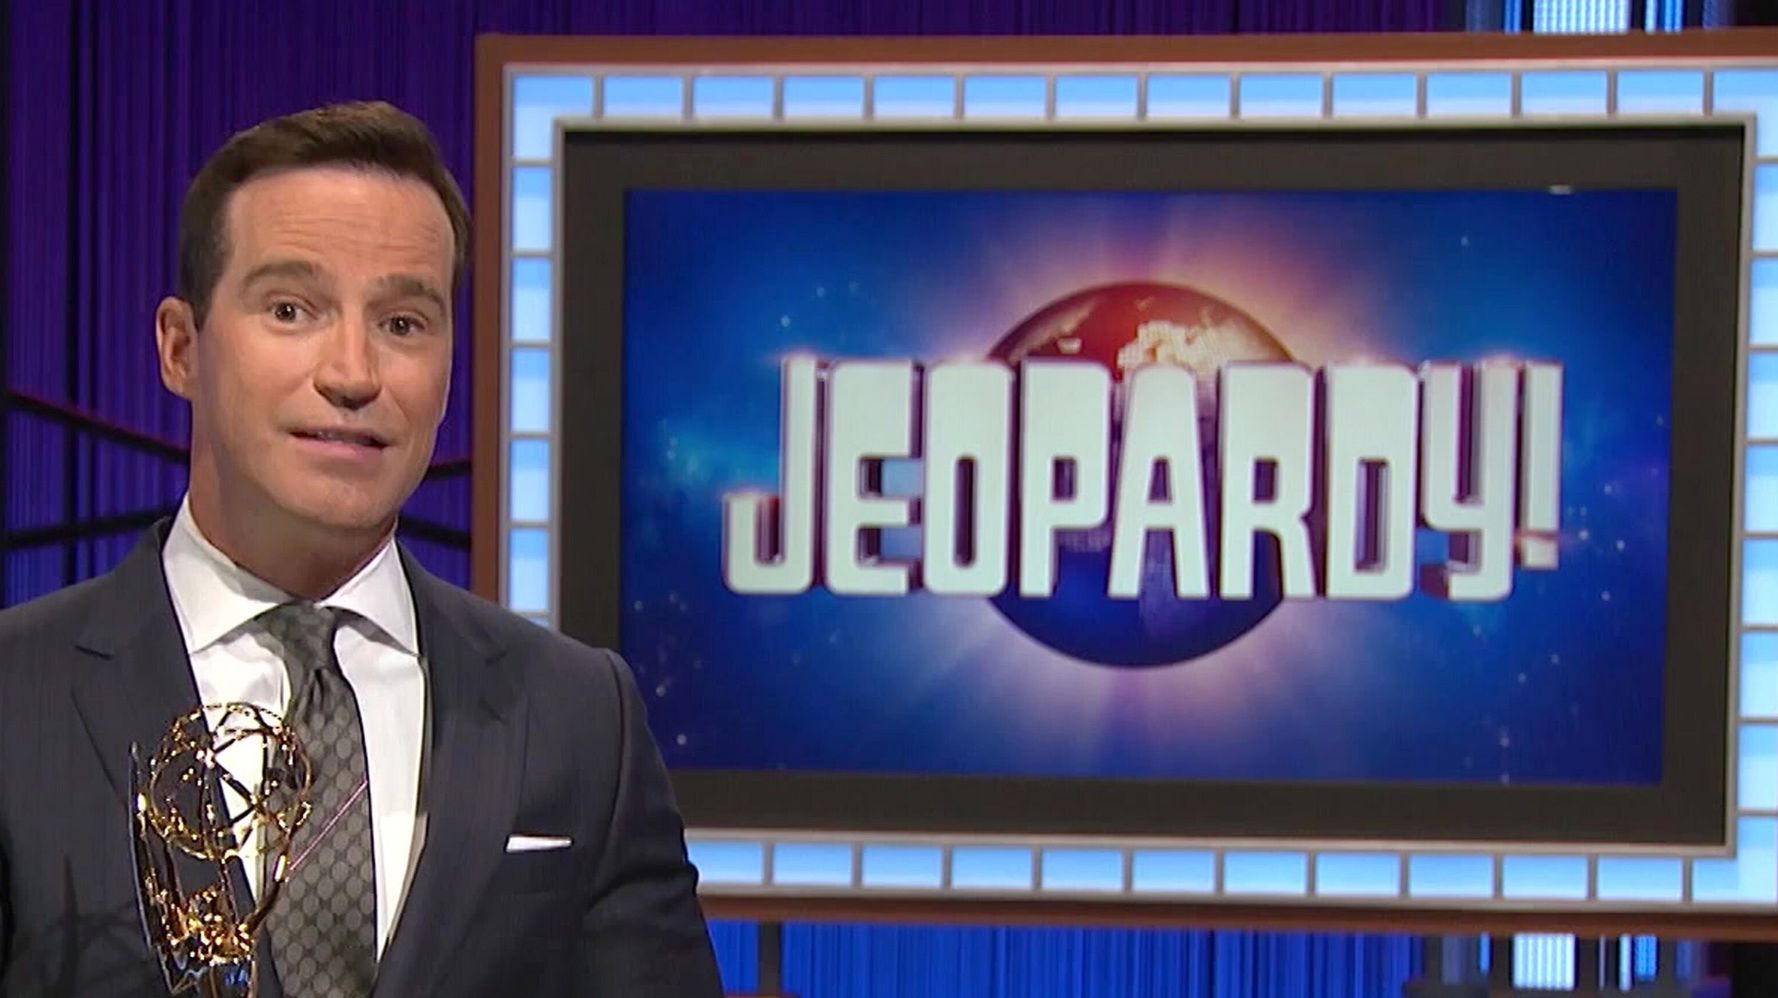 Dictionary.com Offers Perfect Example Of 'Jeopardy' Definition After Mike Richards Exit